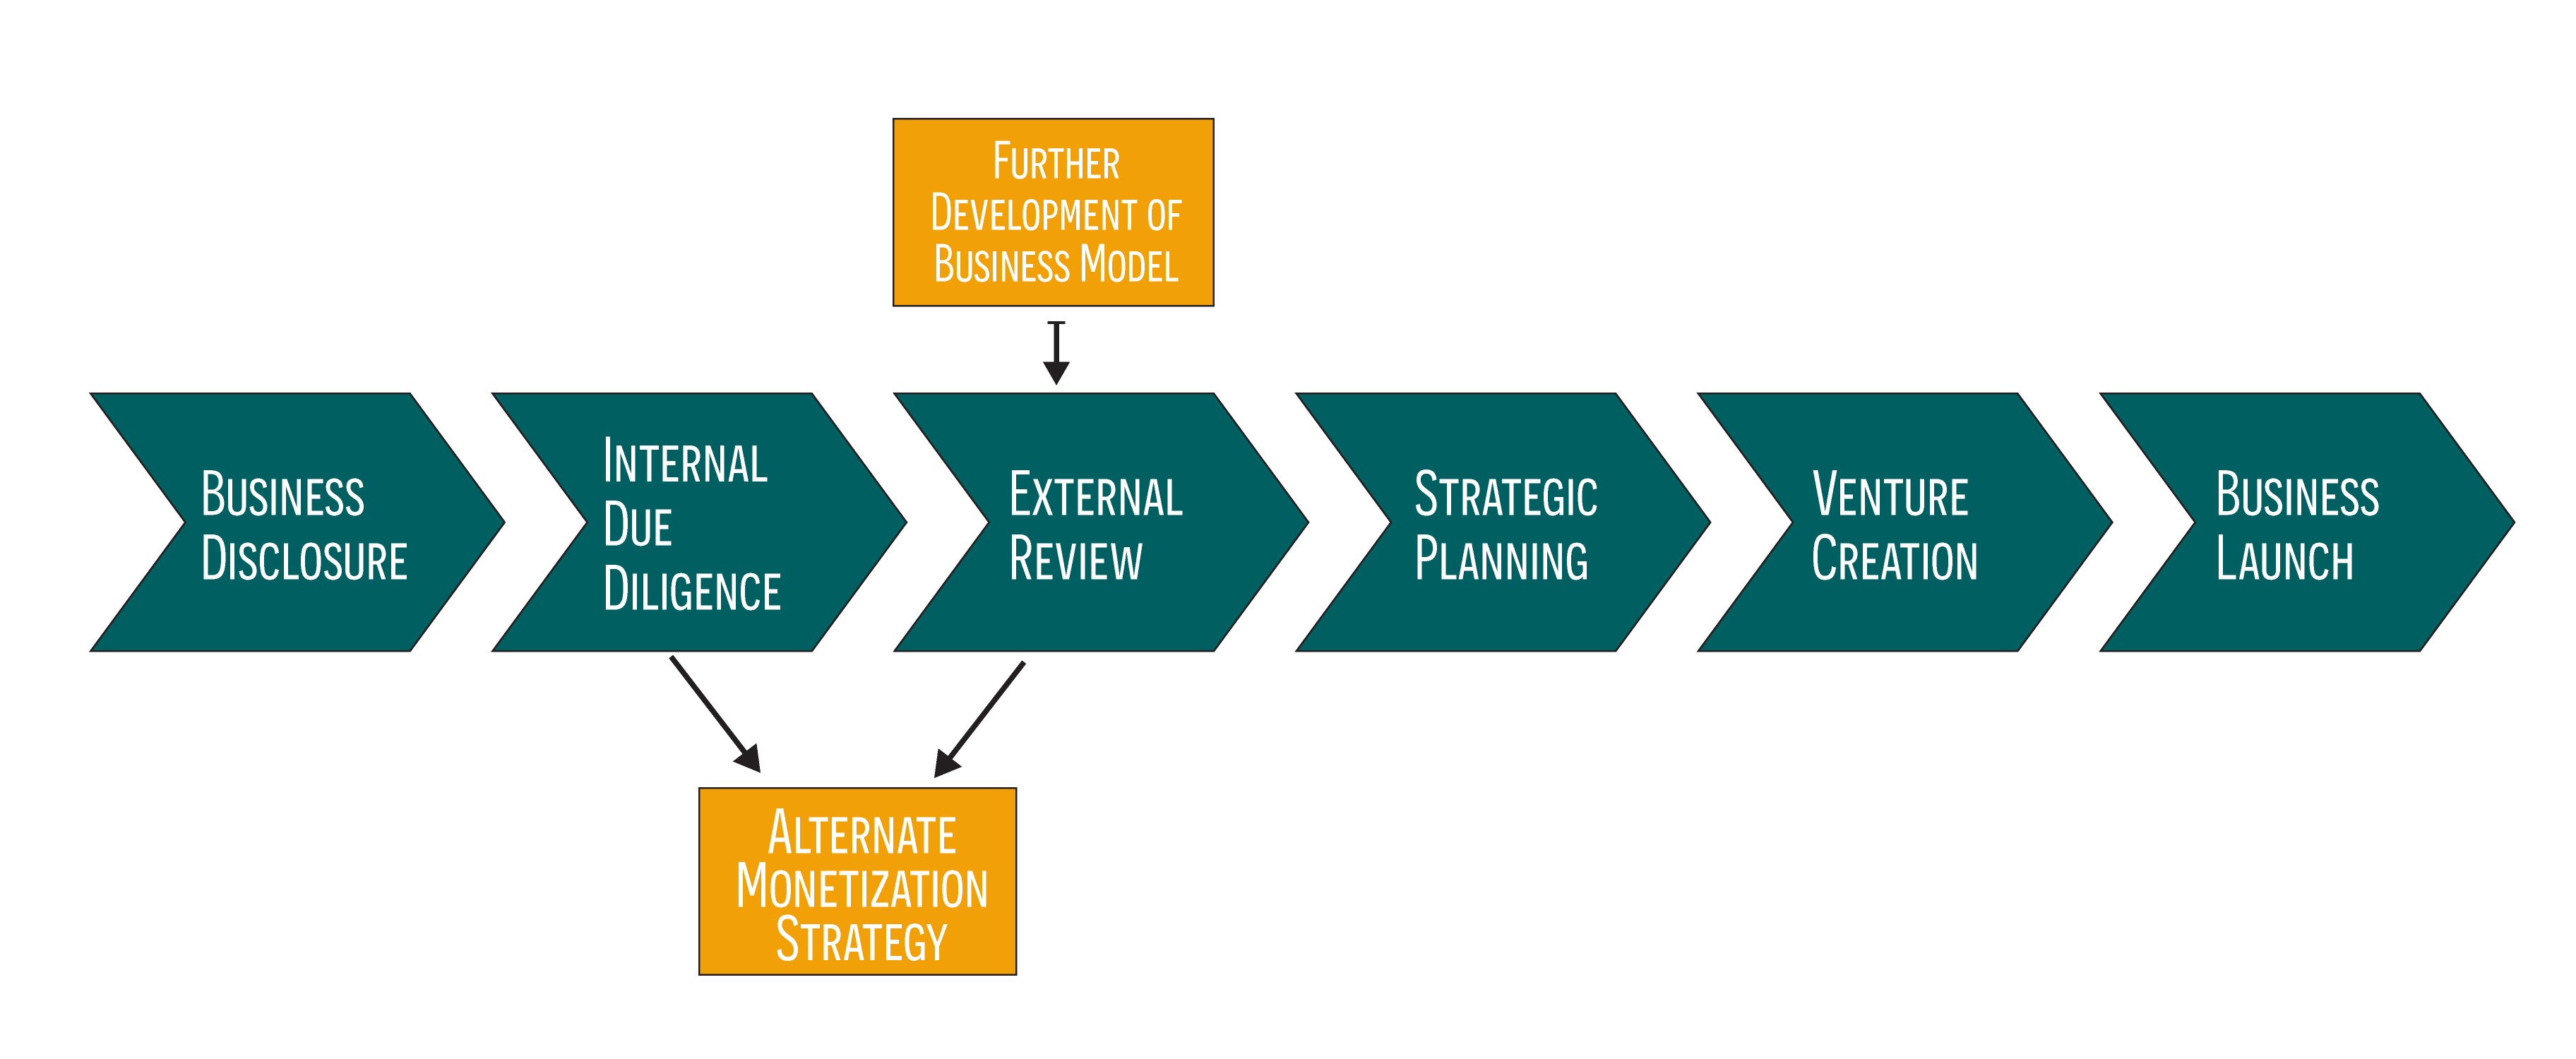 Click on the diagram to read more about Vanderbilt's Commercialization Process.